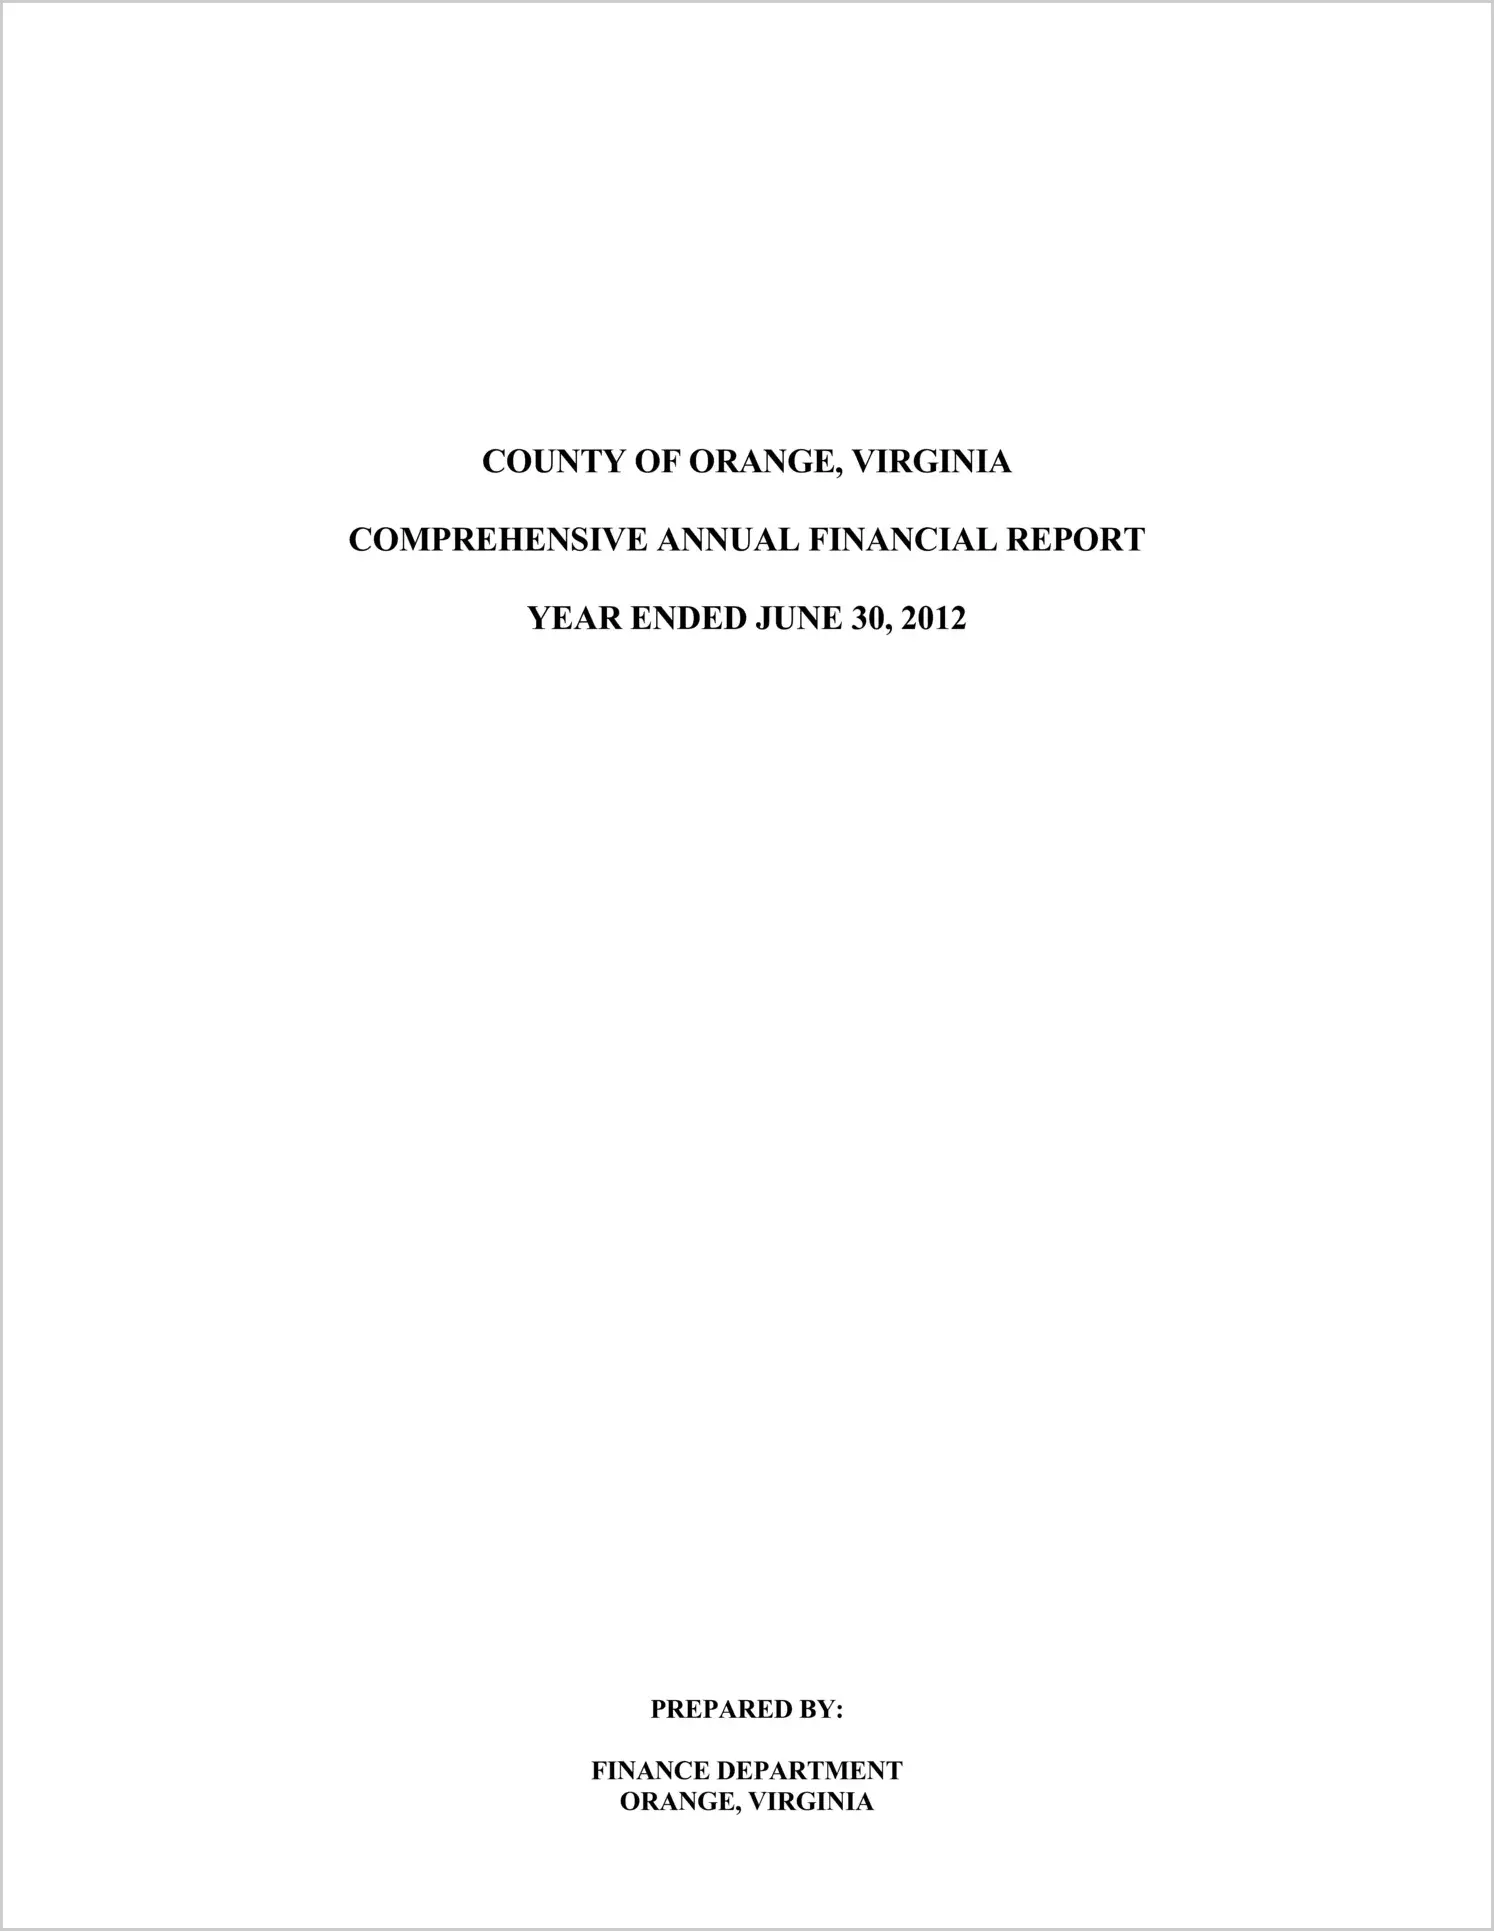 2012 Annual Financial Report for County of Orange